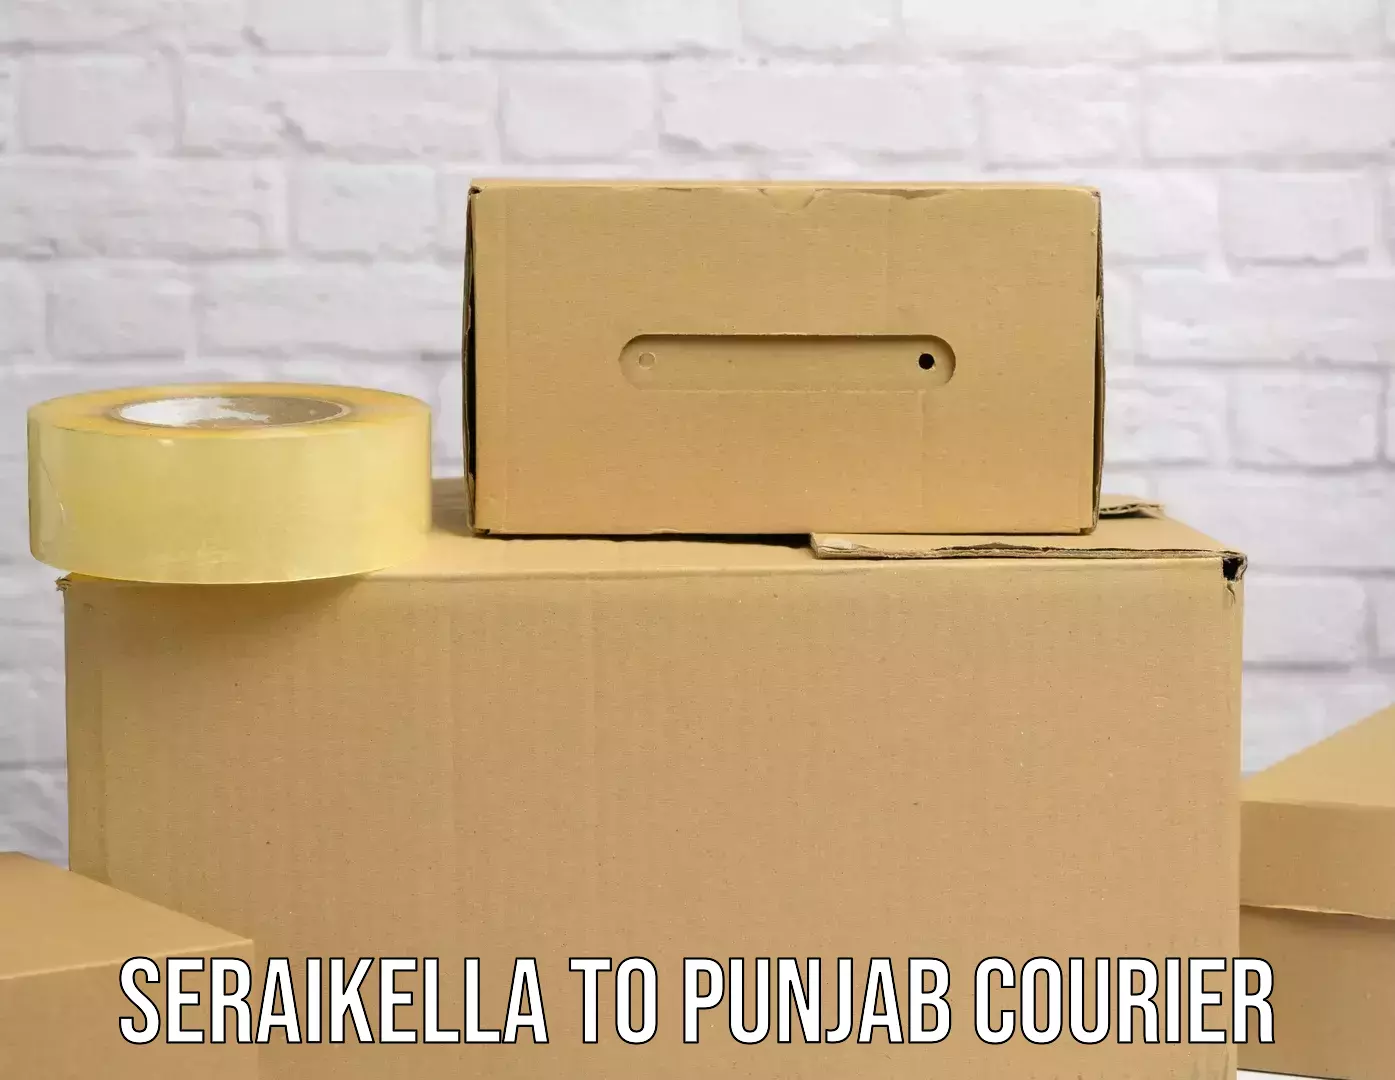 Reliable courier service Seraikella to Patiala